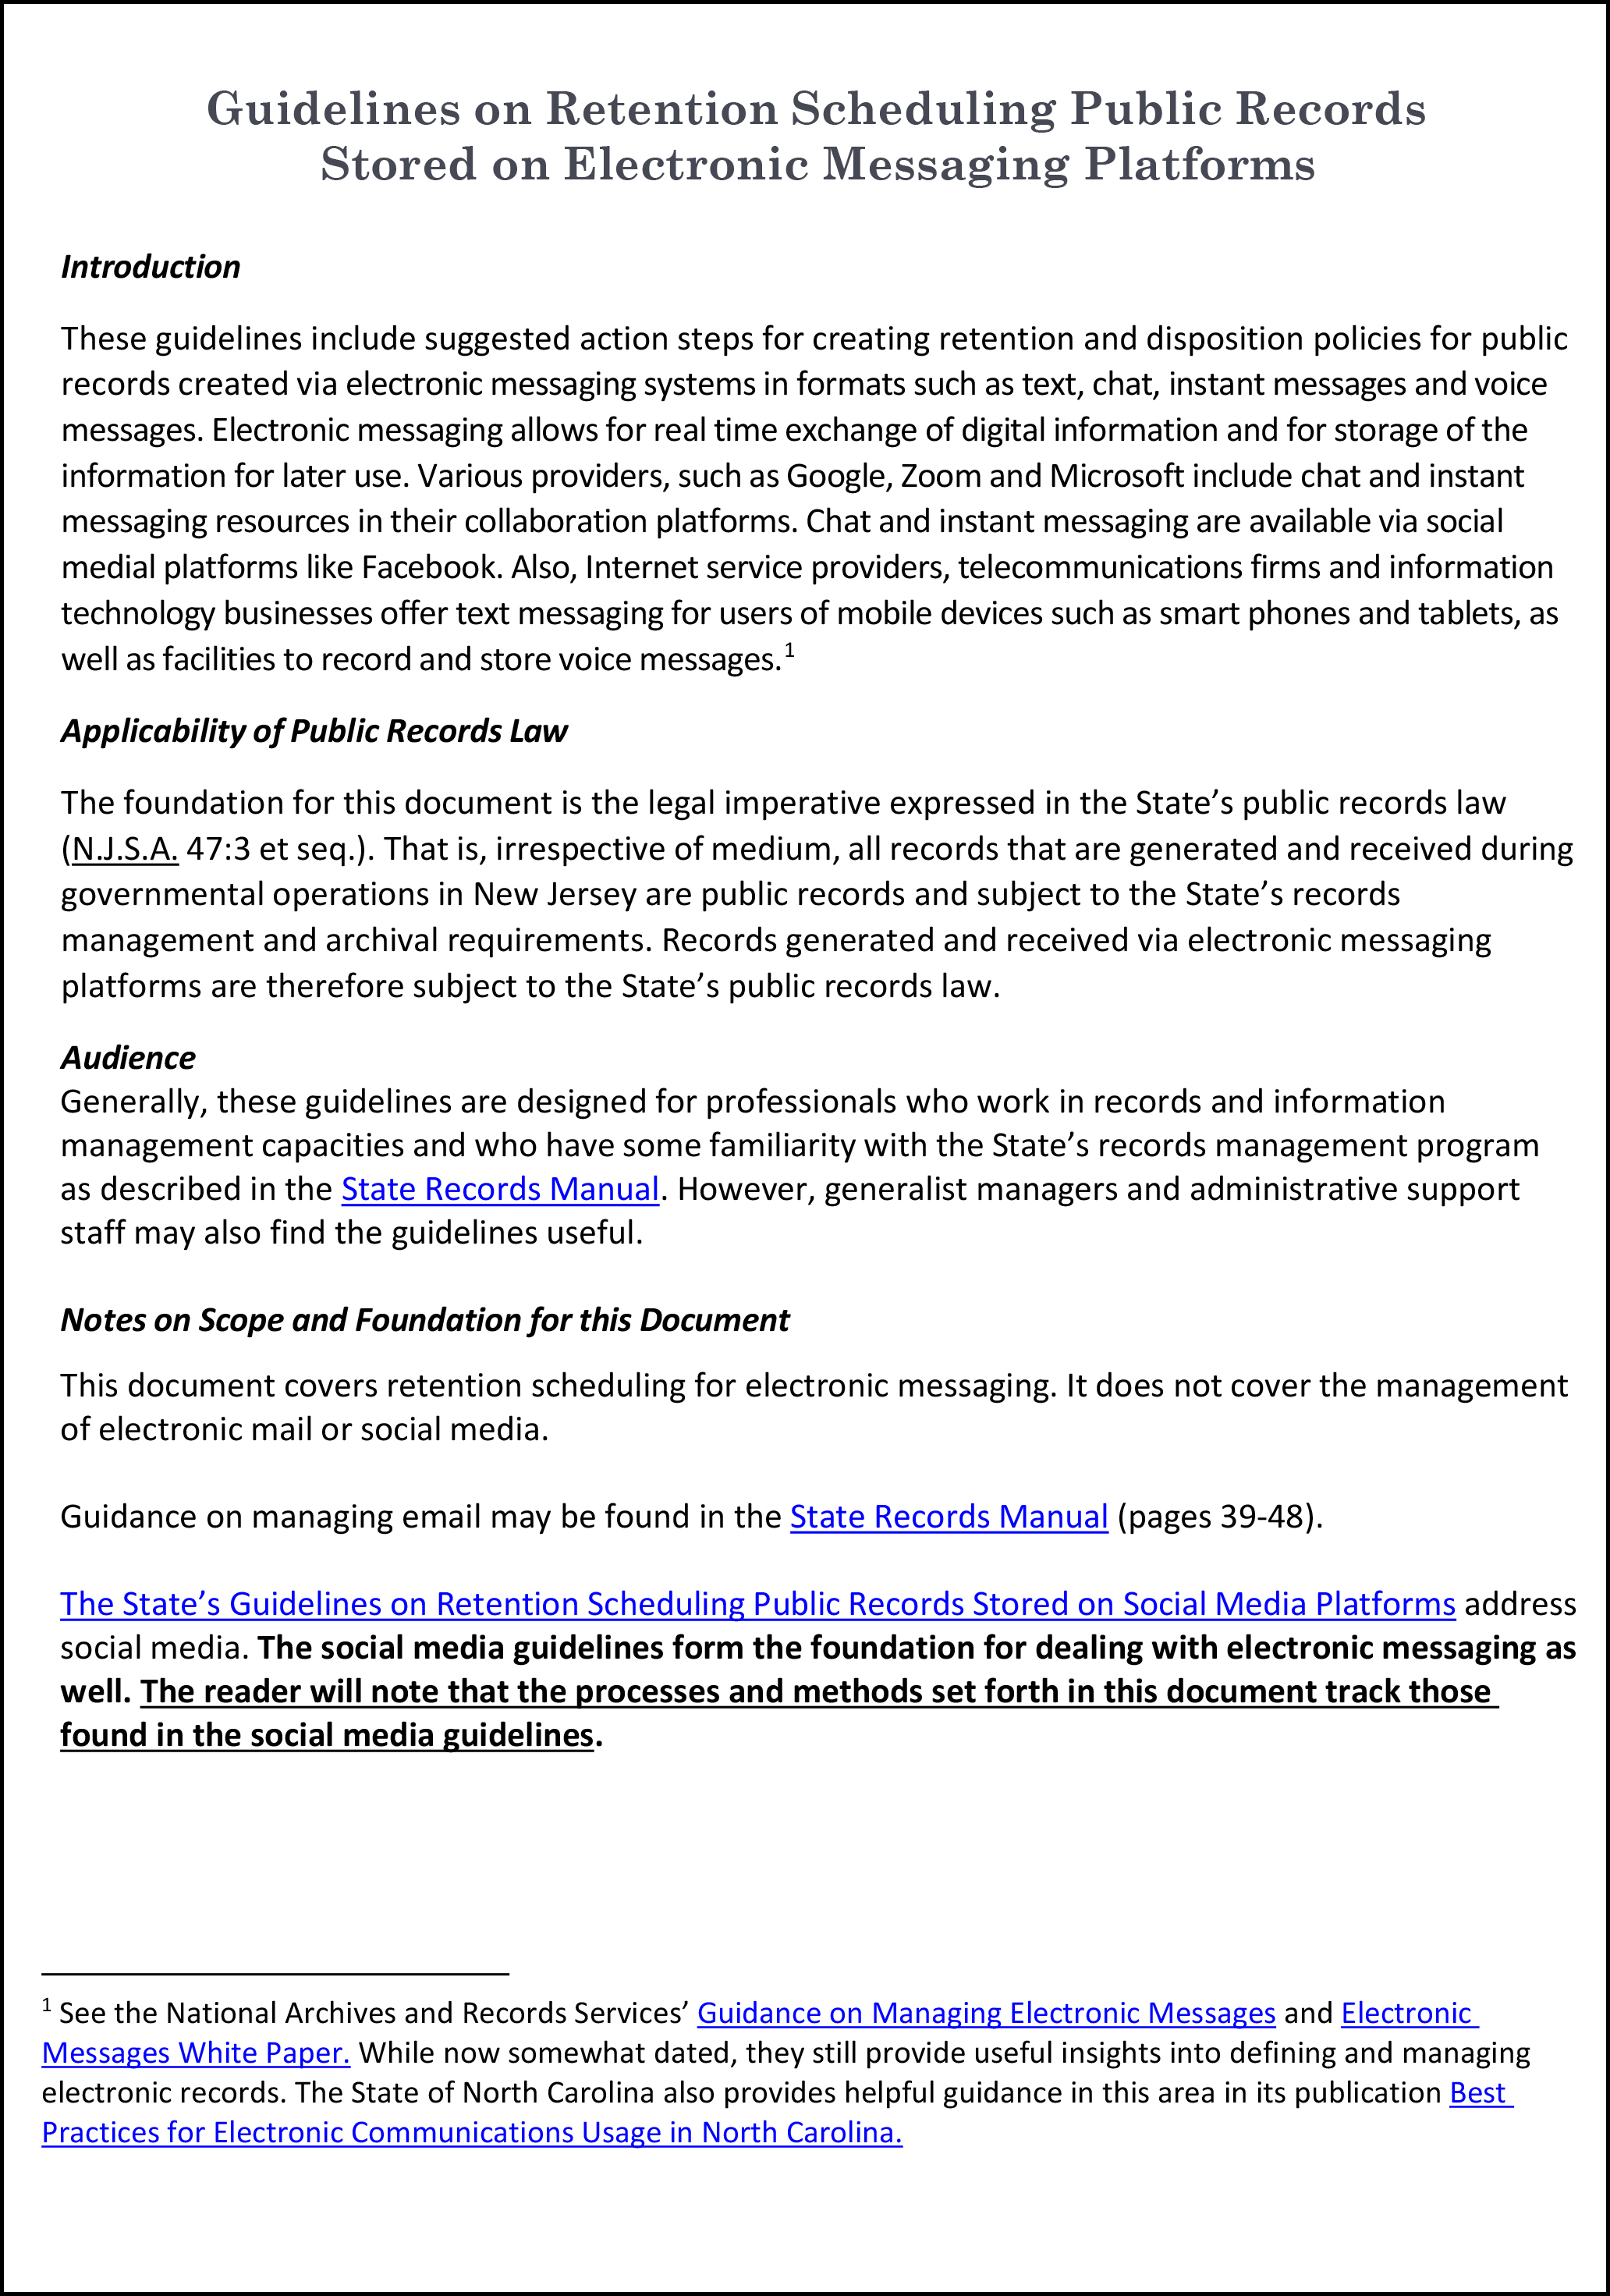 Guidelines on Retention Scheduling Public Records Stored on Electronic Messaging Platforms